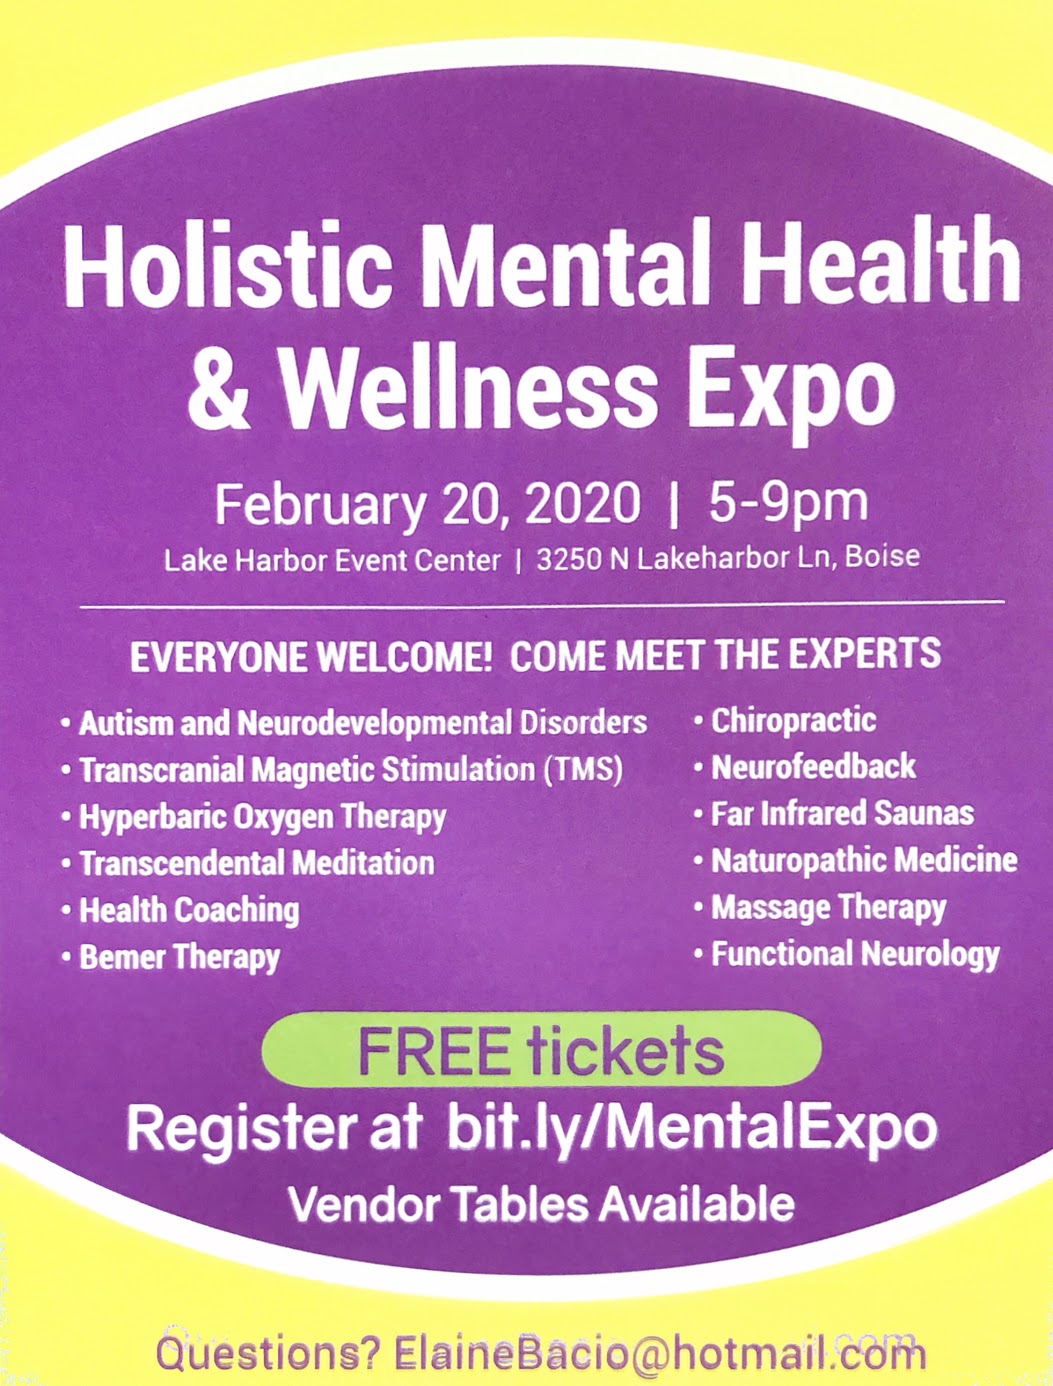 Holistic Mental Health & Wellness Expo, February 20, 2020 from 5-9pm at Lake Harbor Event Center flyer